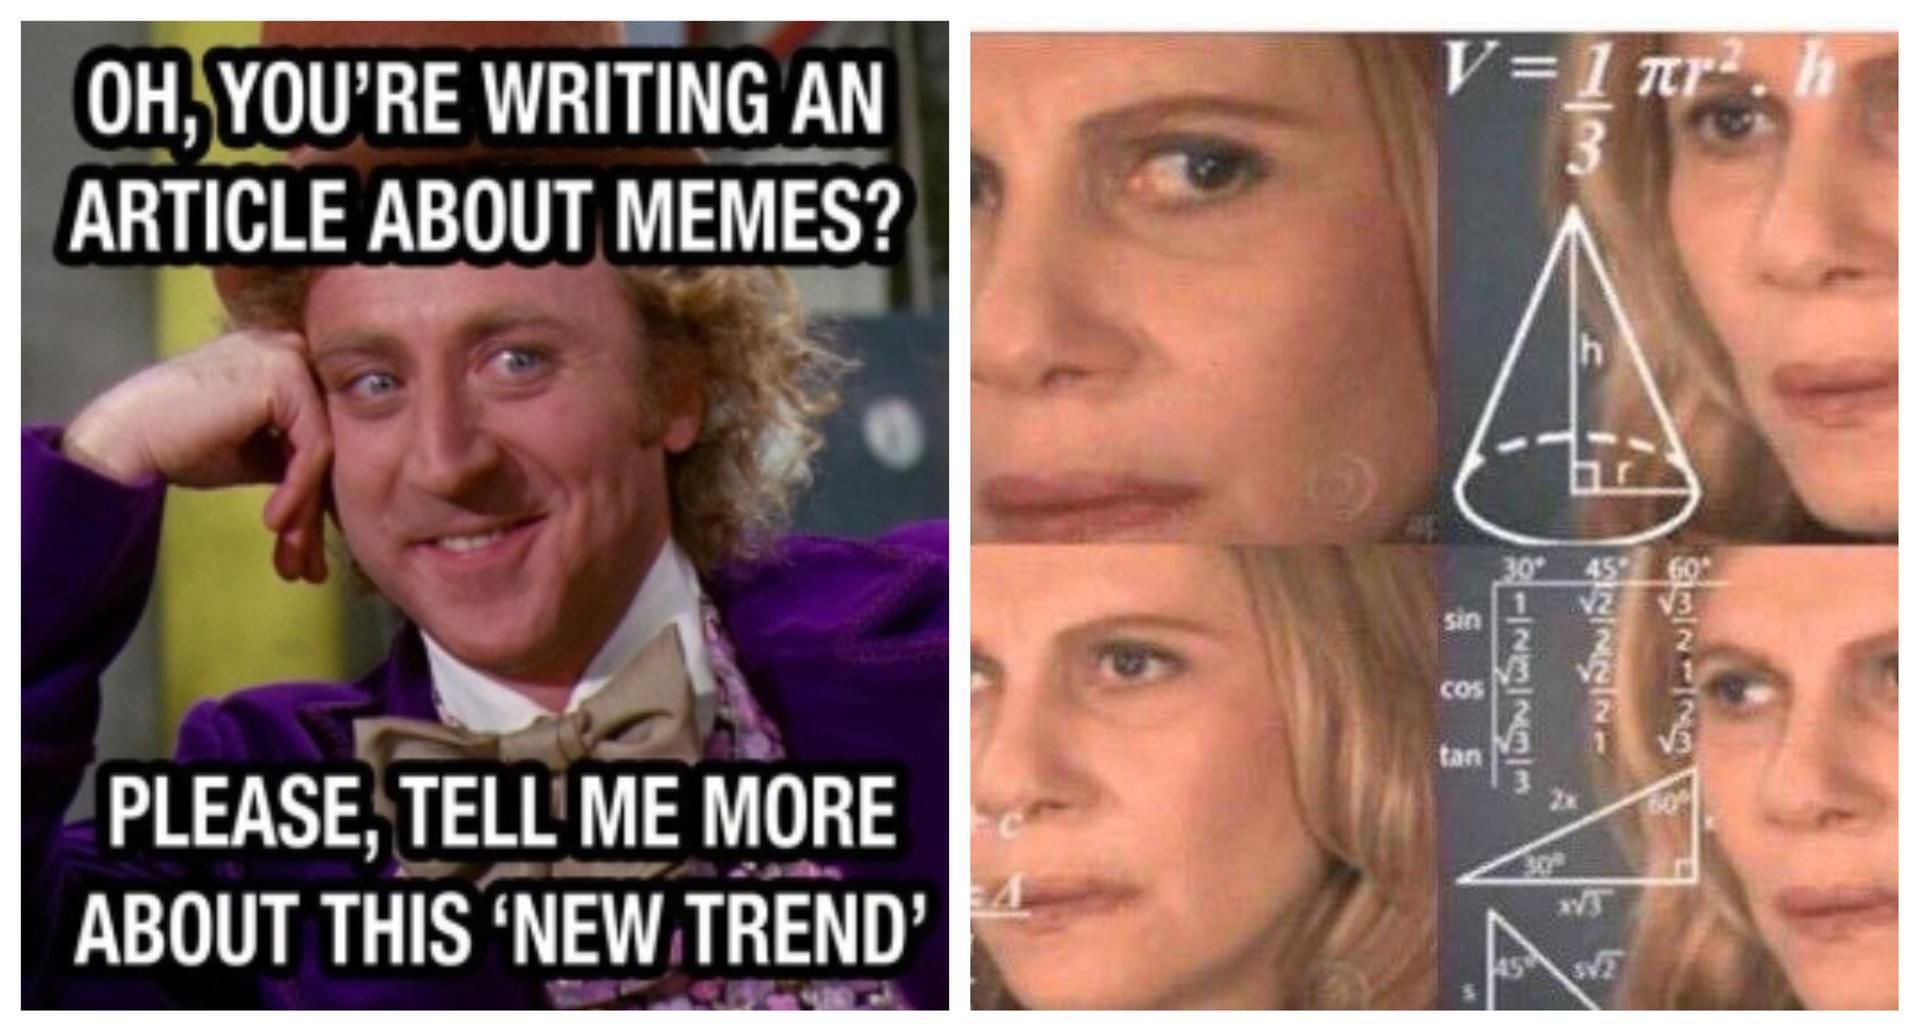 What is We Meme about?